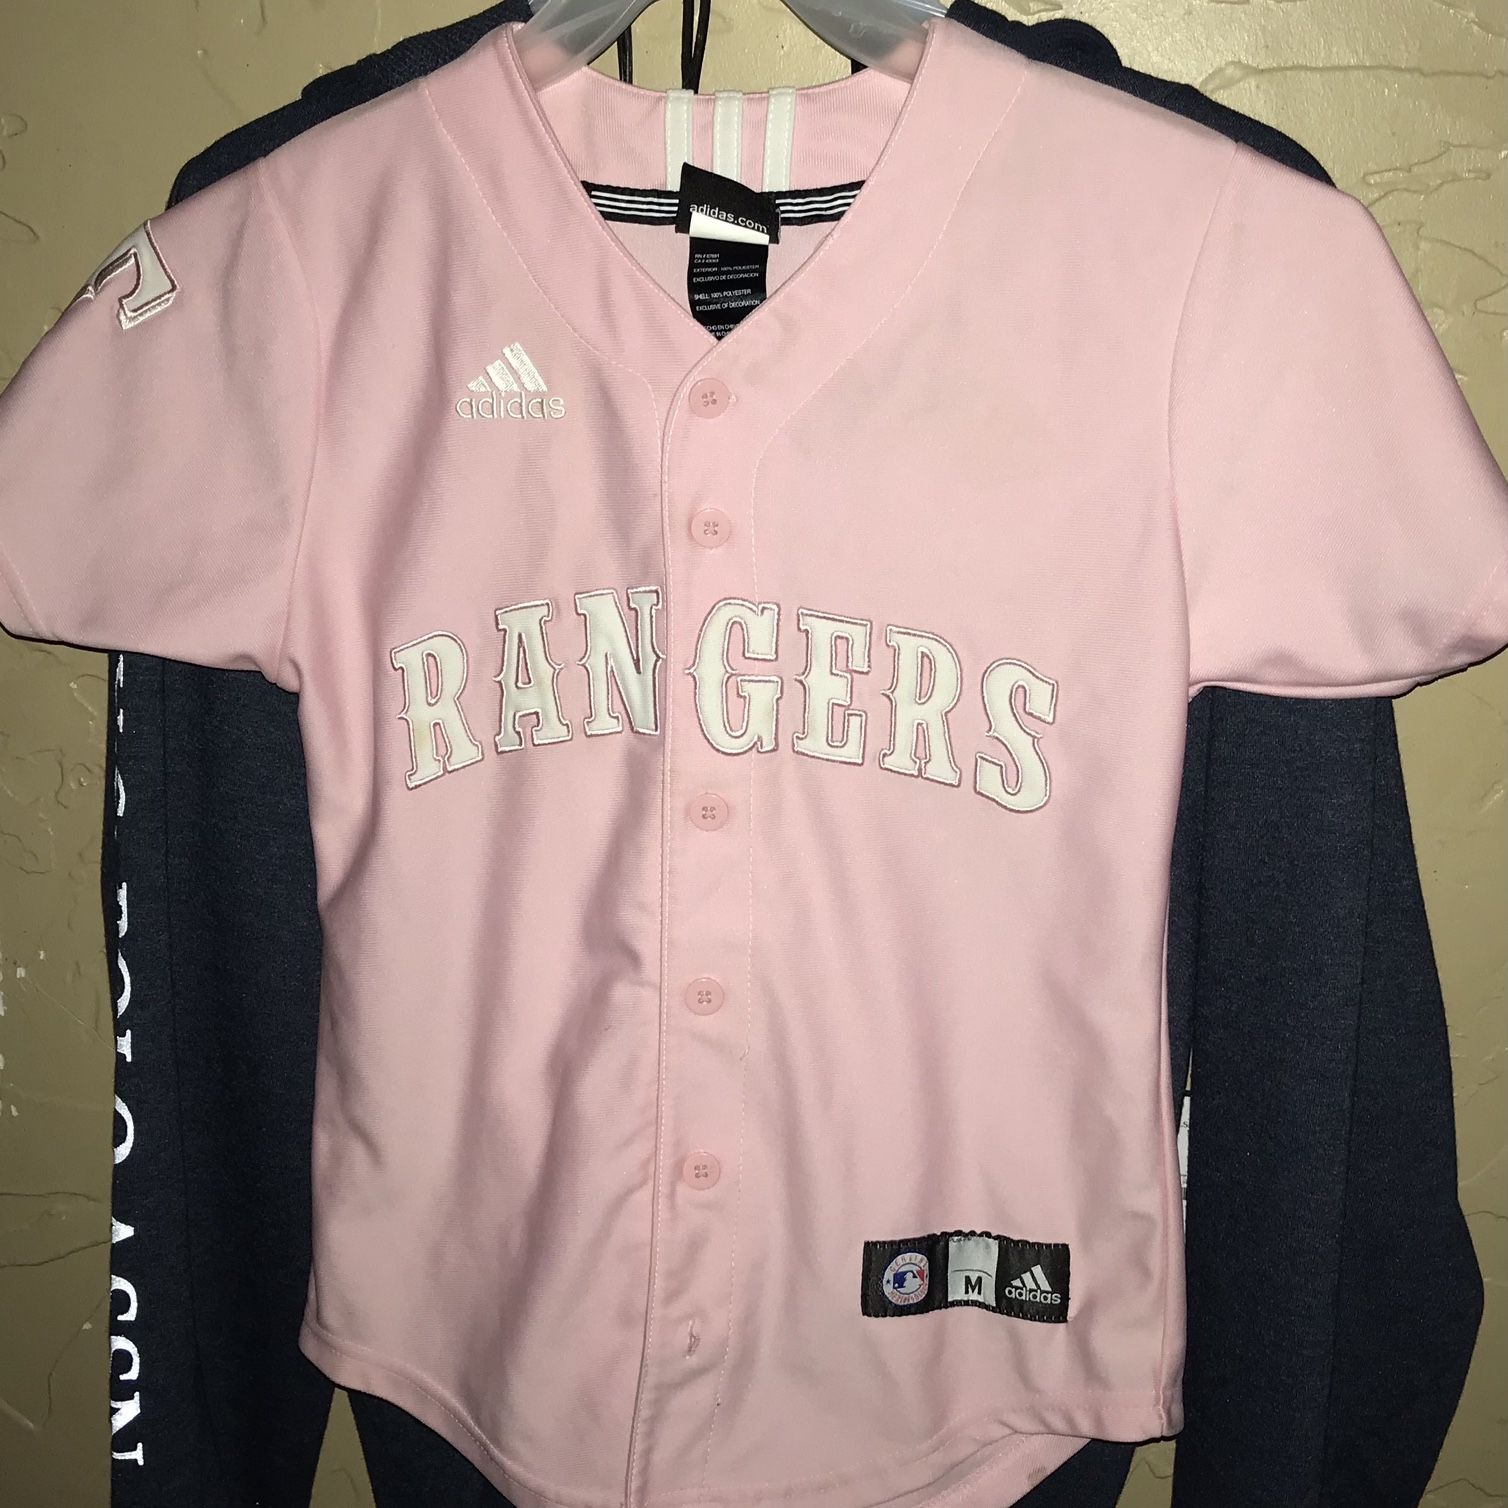 $8-Girls Official Youth MLB Adidas Jerseys M (10-12)